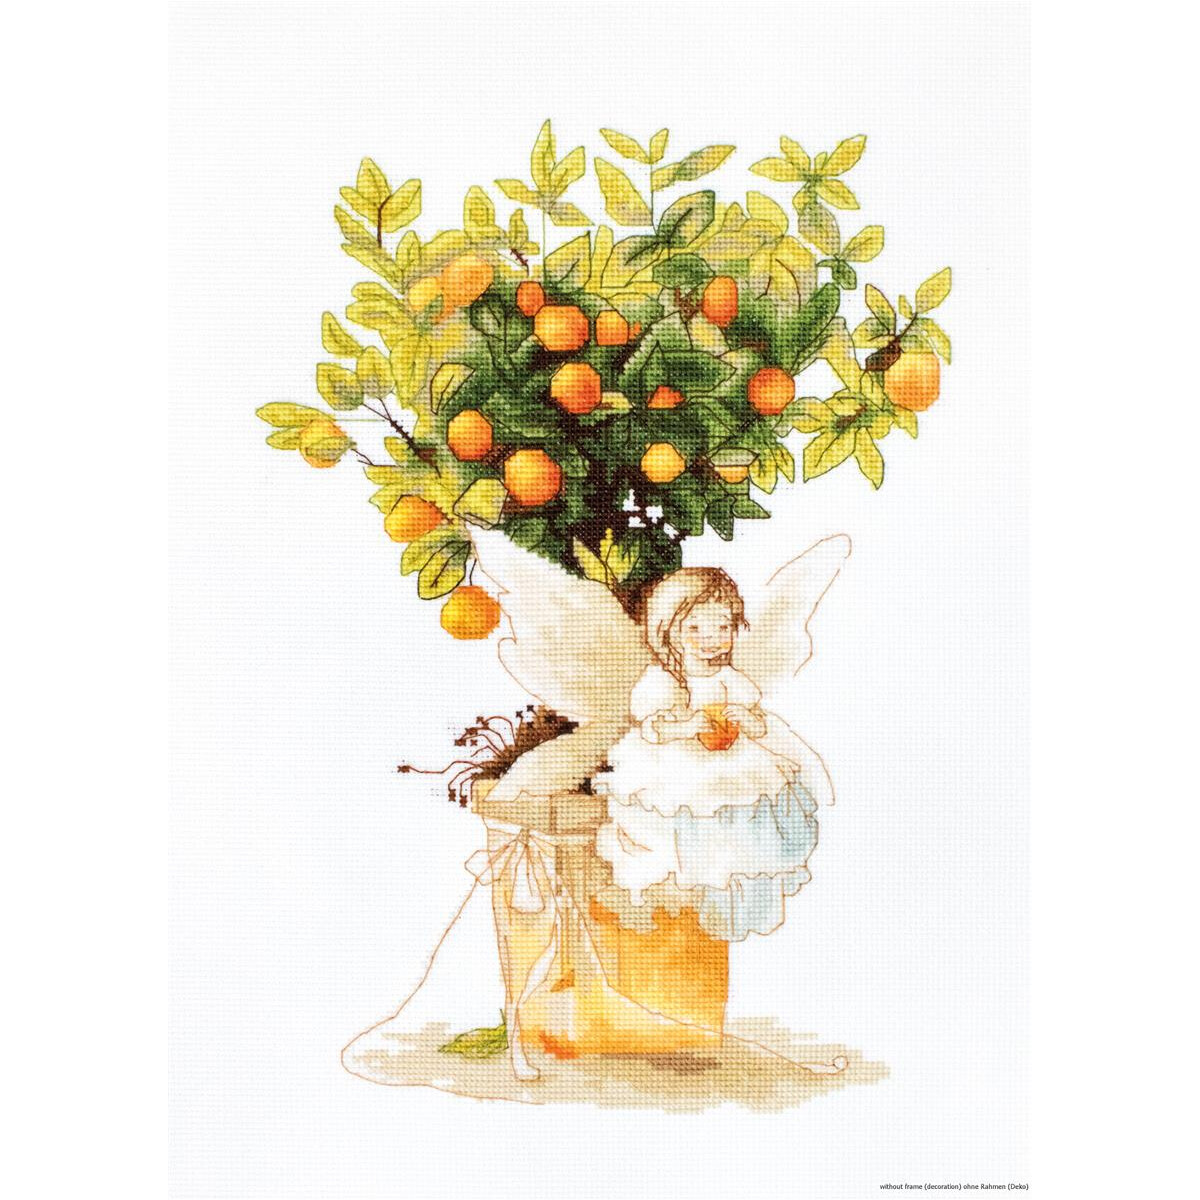 Luca-S counted Cross Stitch kit "Tangerine ",...